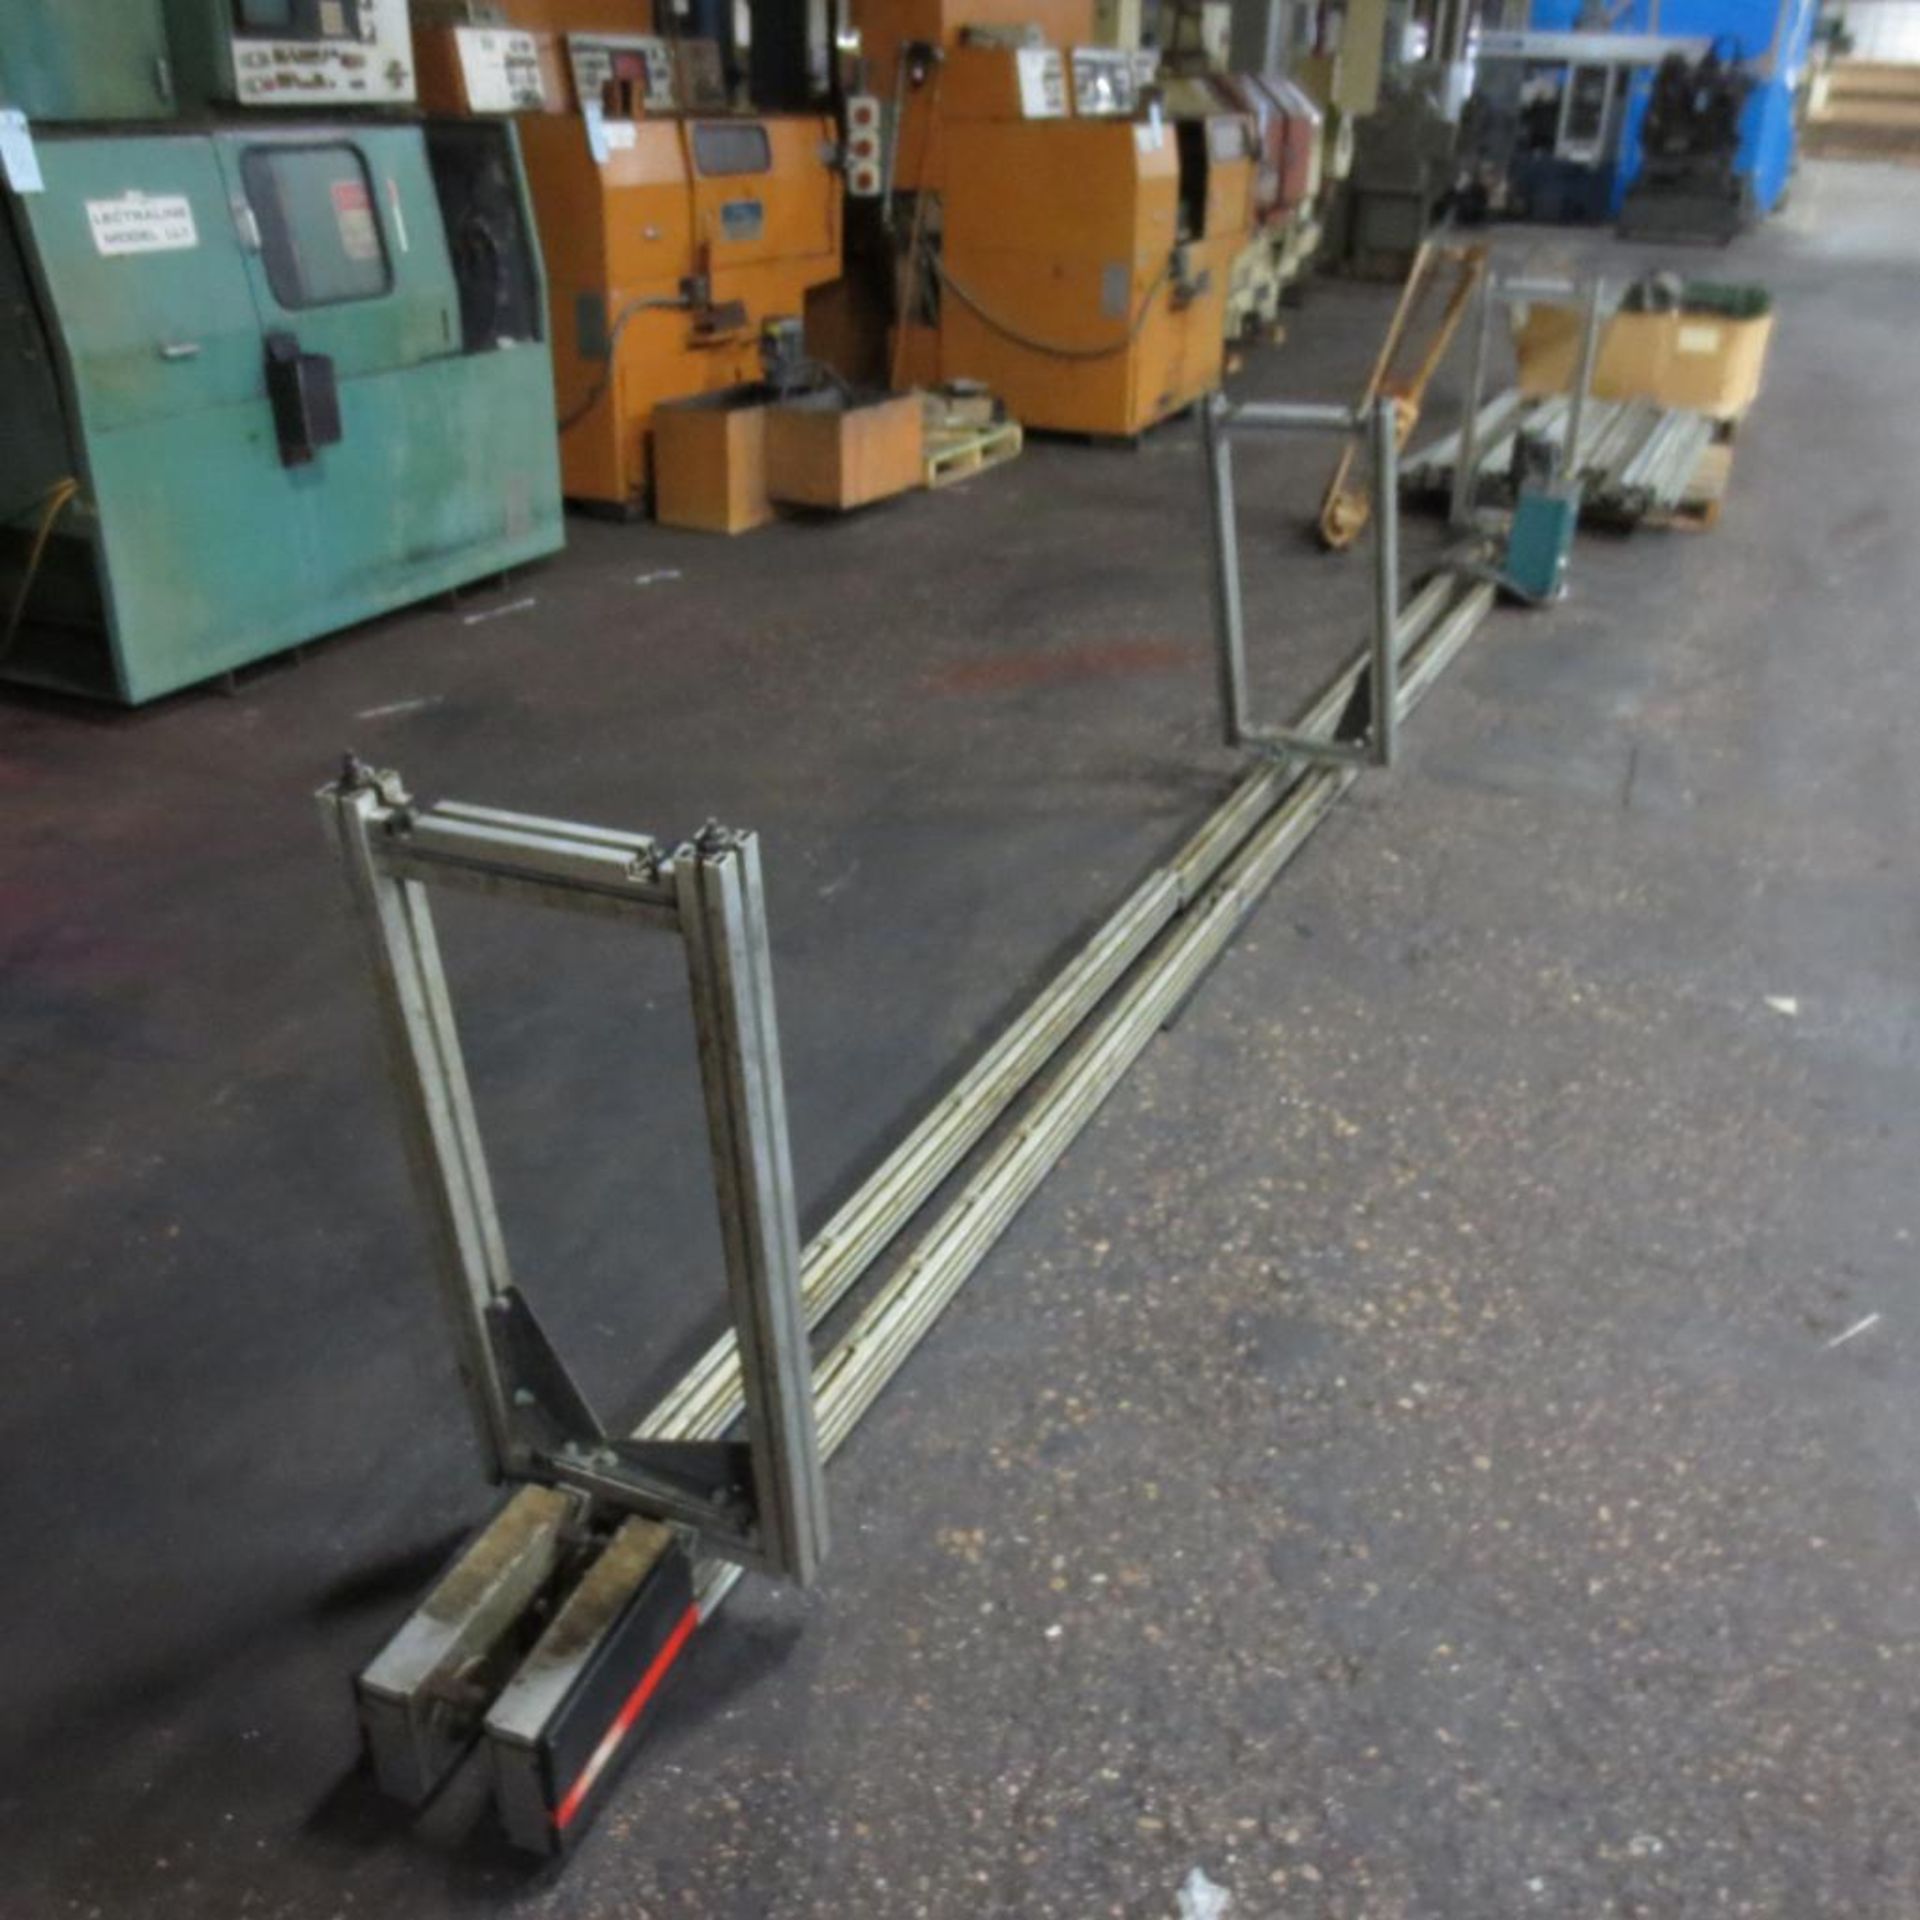 Row of Aluminum Frame for Conveyors and Fencing and Orange Fence. Loading Fee is $150.00 - Image 3 of 5